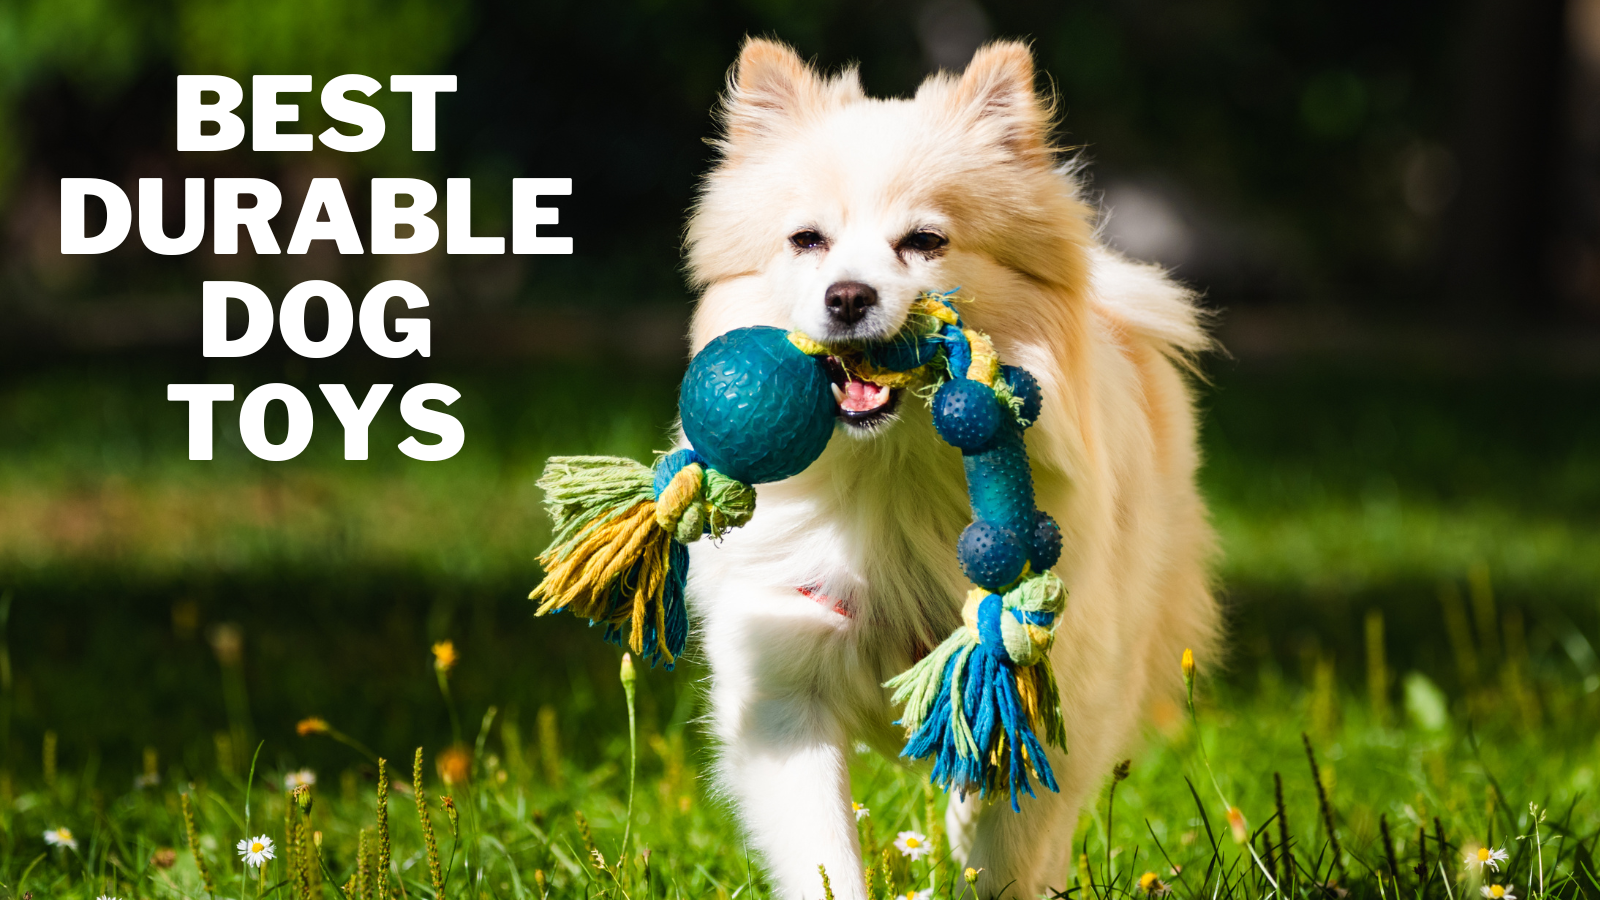 Best Durable Dog Toys